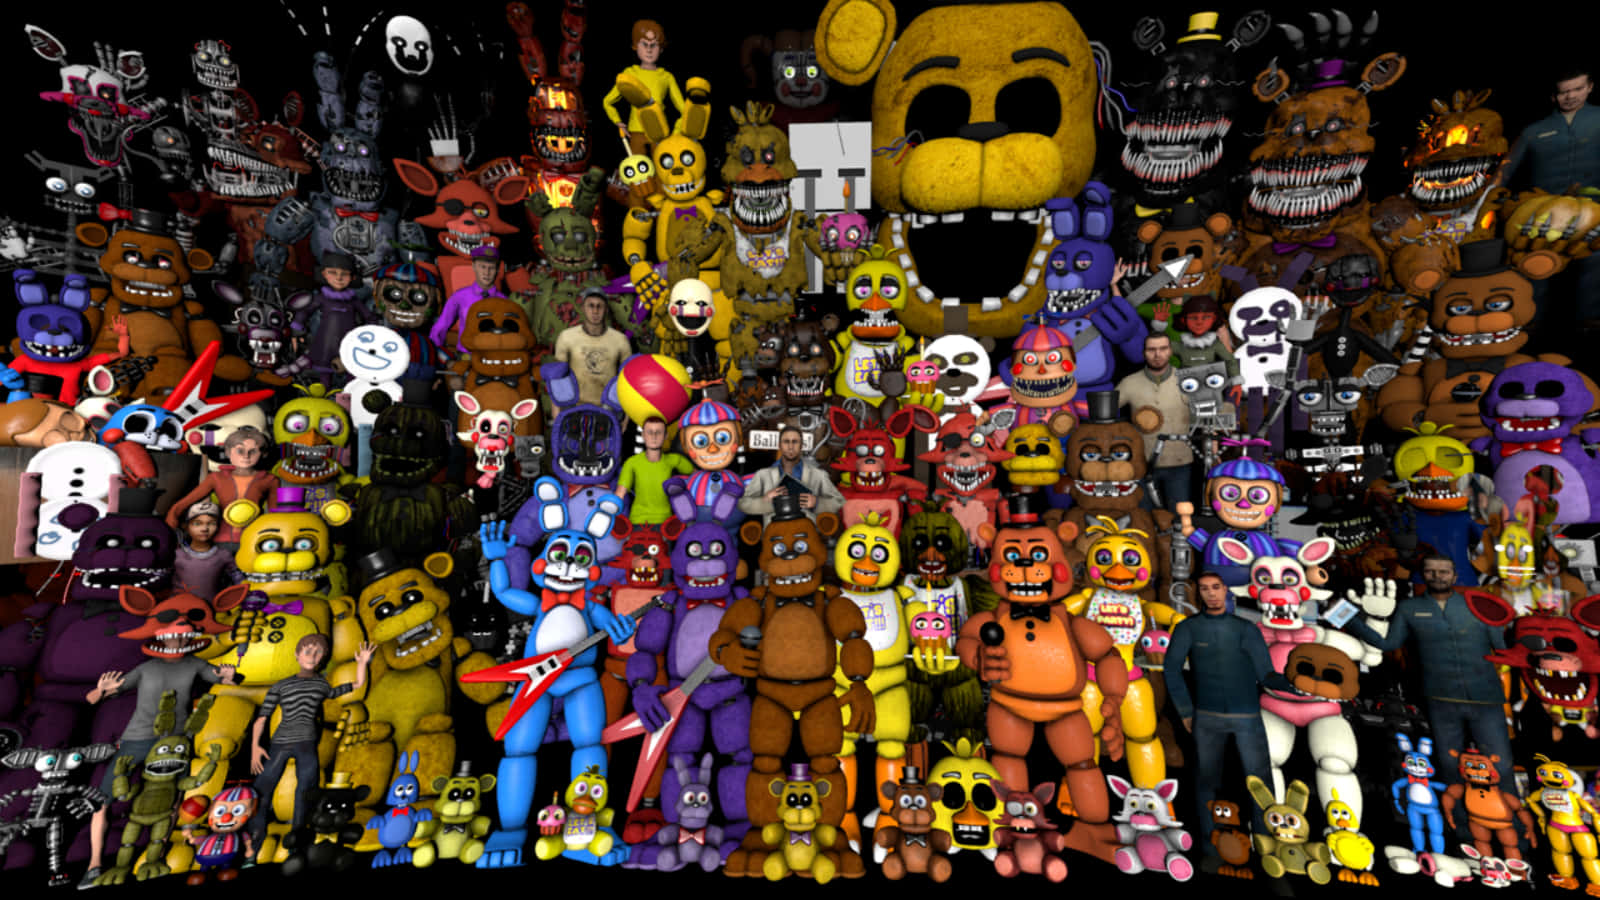 The beloved Five Nights At Freddy's characters